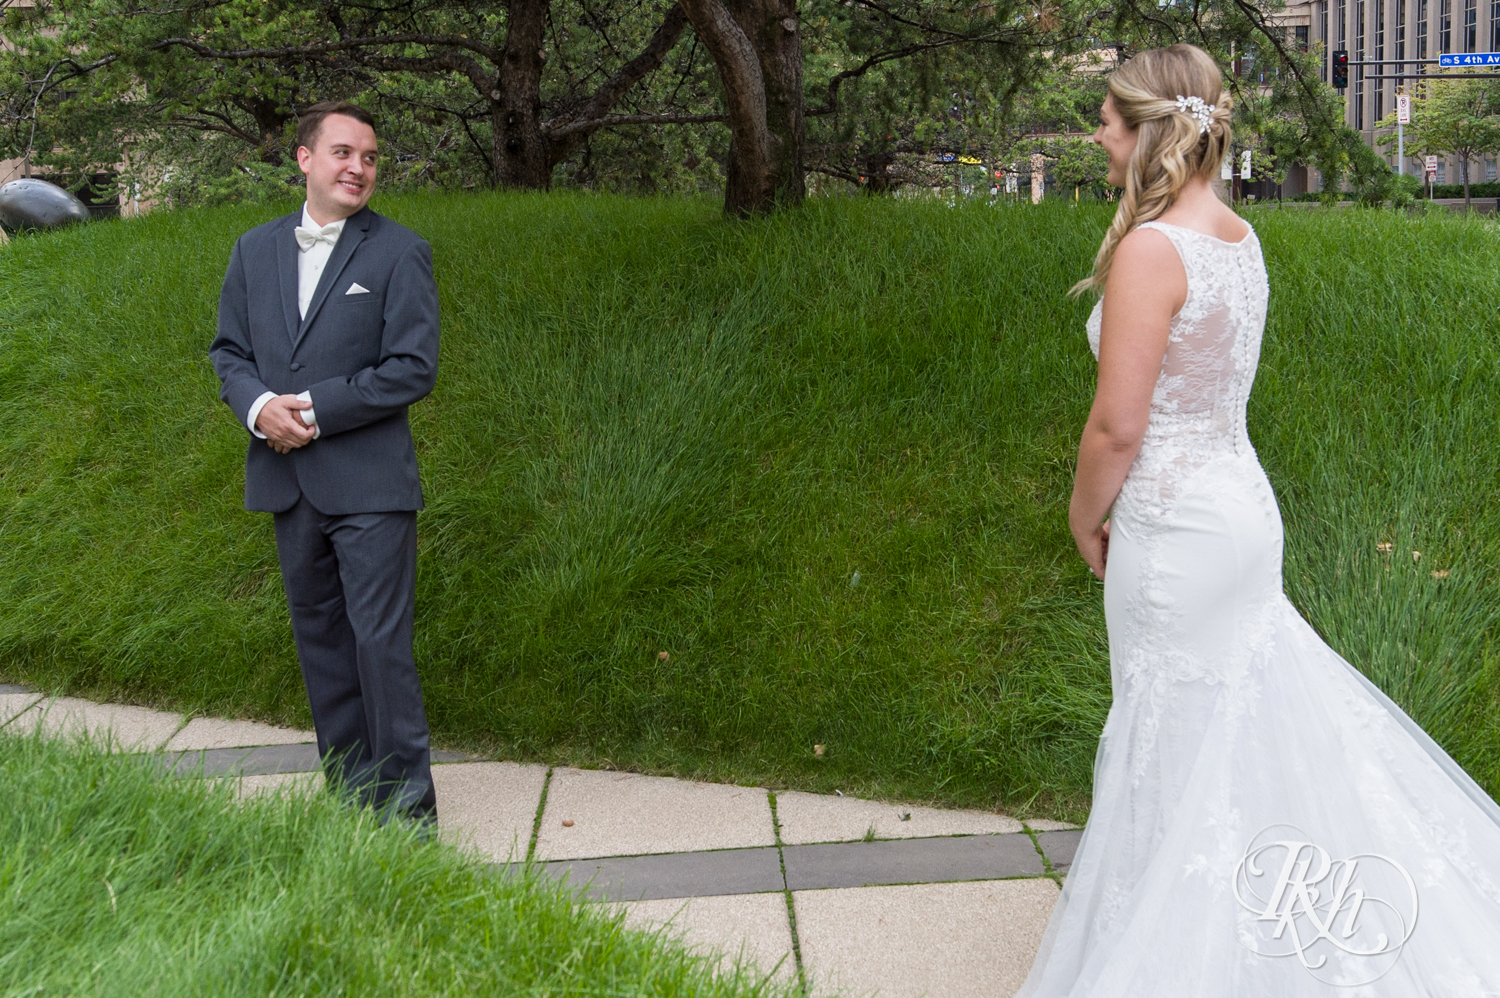 Bride and groom share first look in the city in Minneapolis, Minnesota.